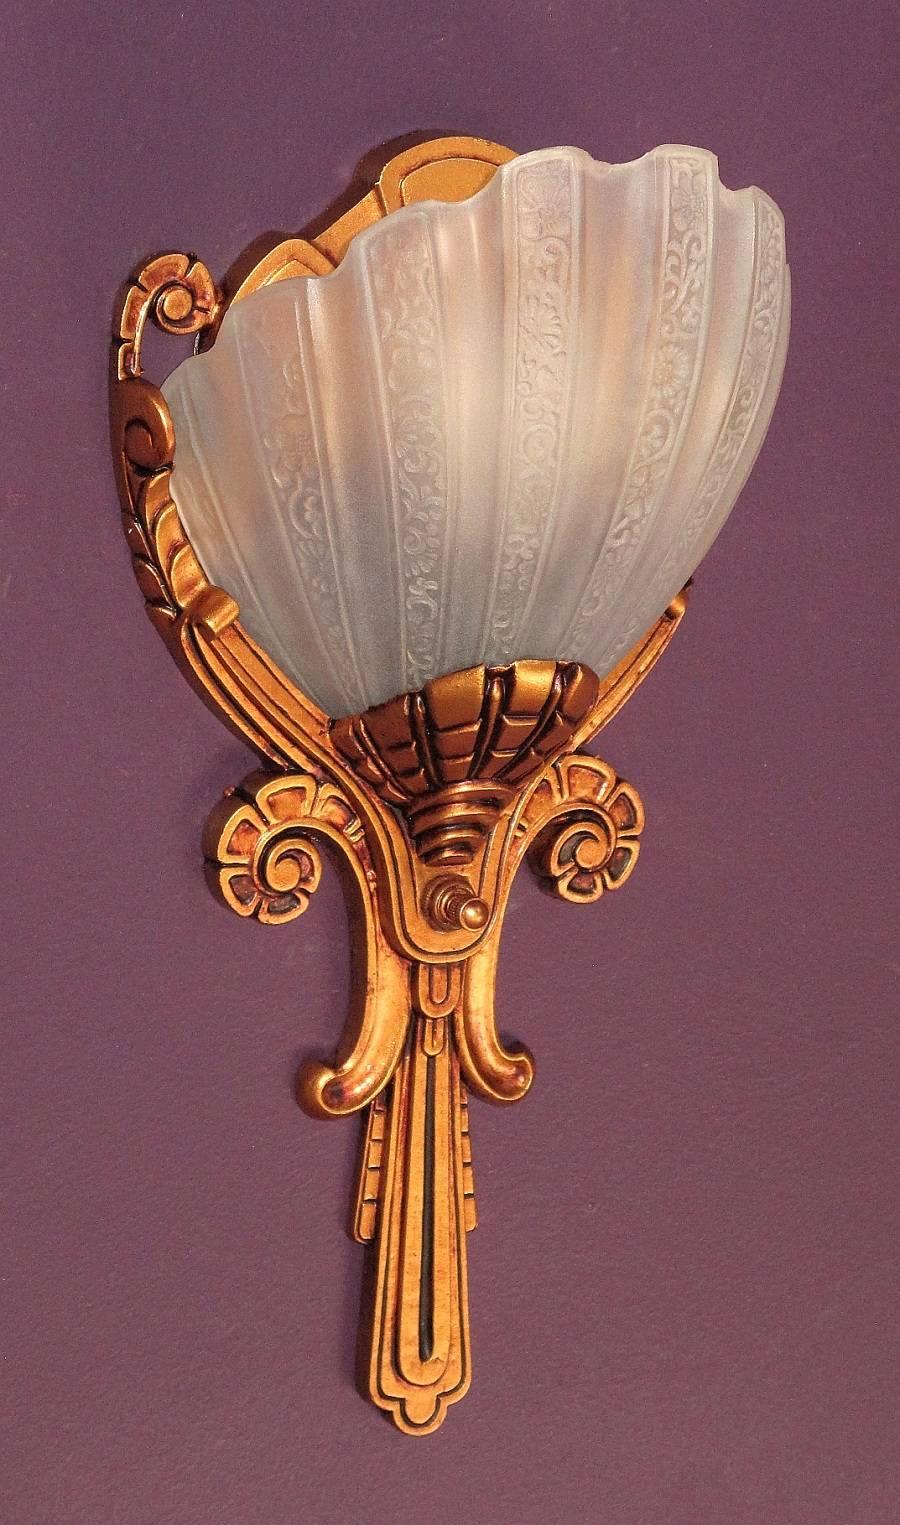 Only 4 available, priced each.
Beautiful with the light bulb on or off.
Elegant and stately vintage Art Deco era wall sconces from the 1930s. Their well-executed detailed design and inherent beauty spans numerous genres of architectural styles to